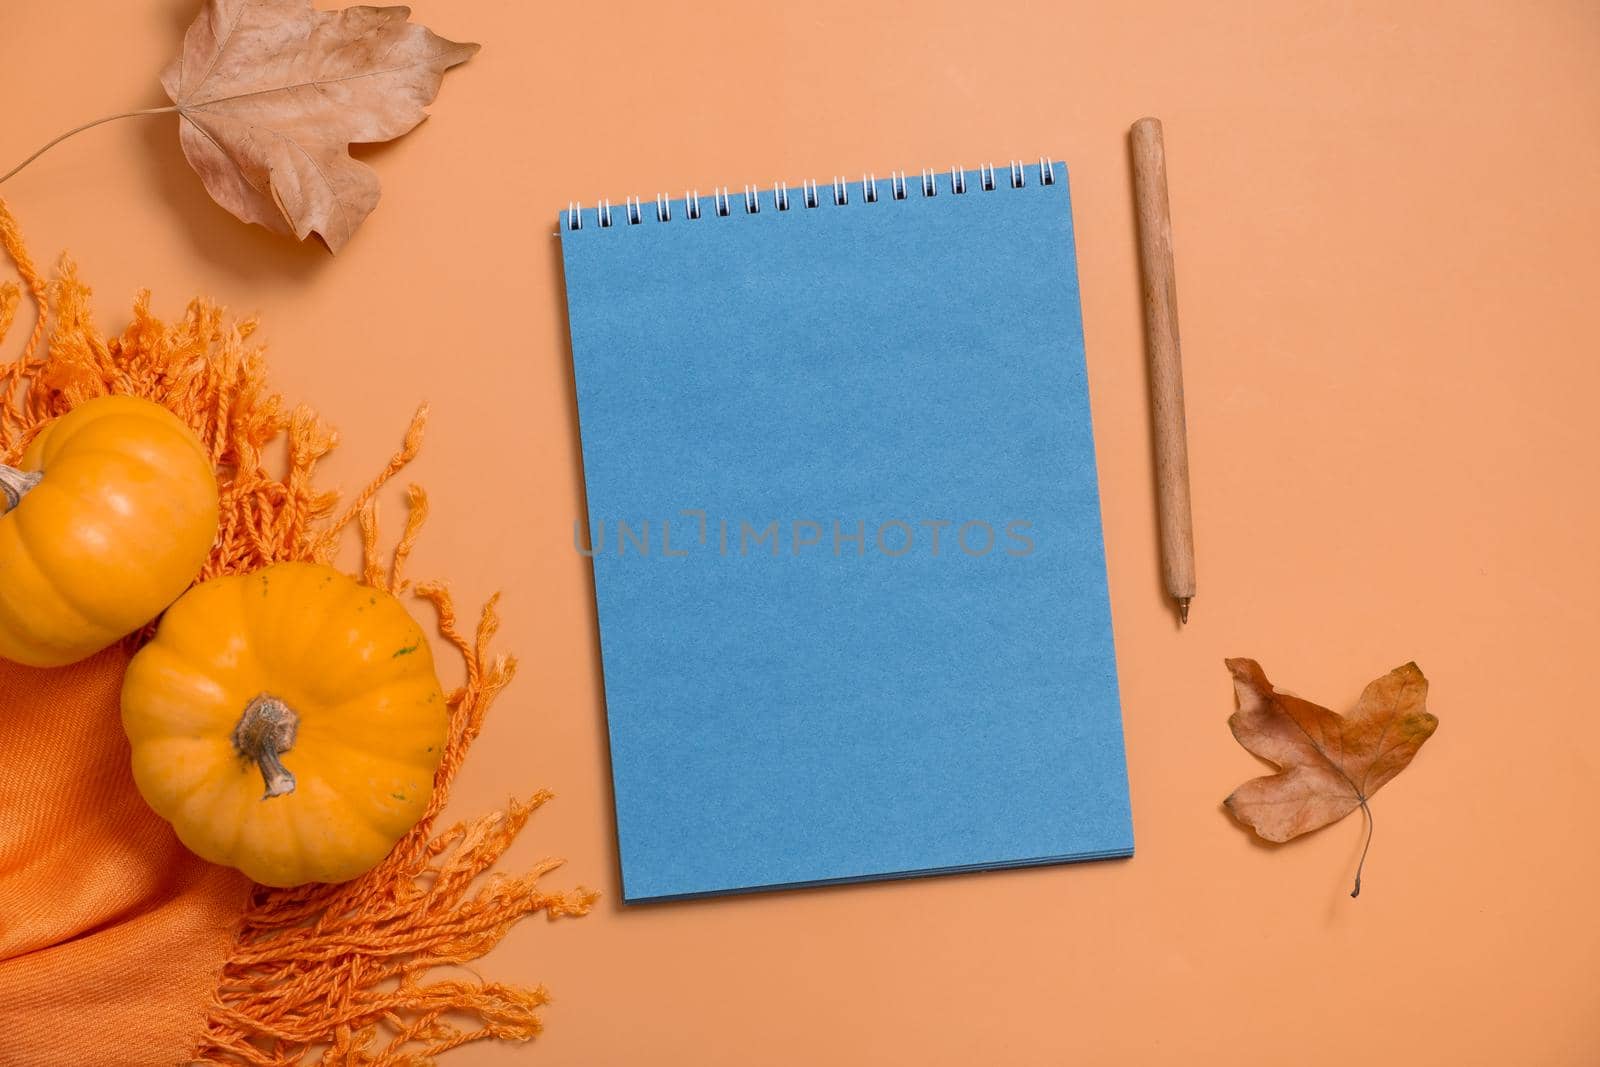 Blank notebook for text and pumpkins with autumn leaves. Autumn theme mock up.